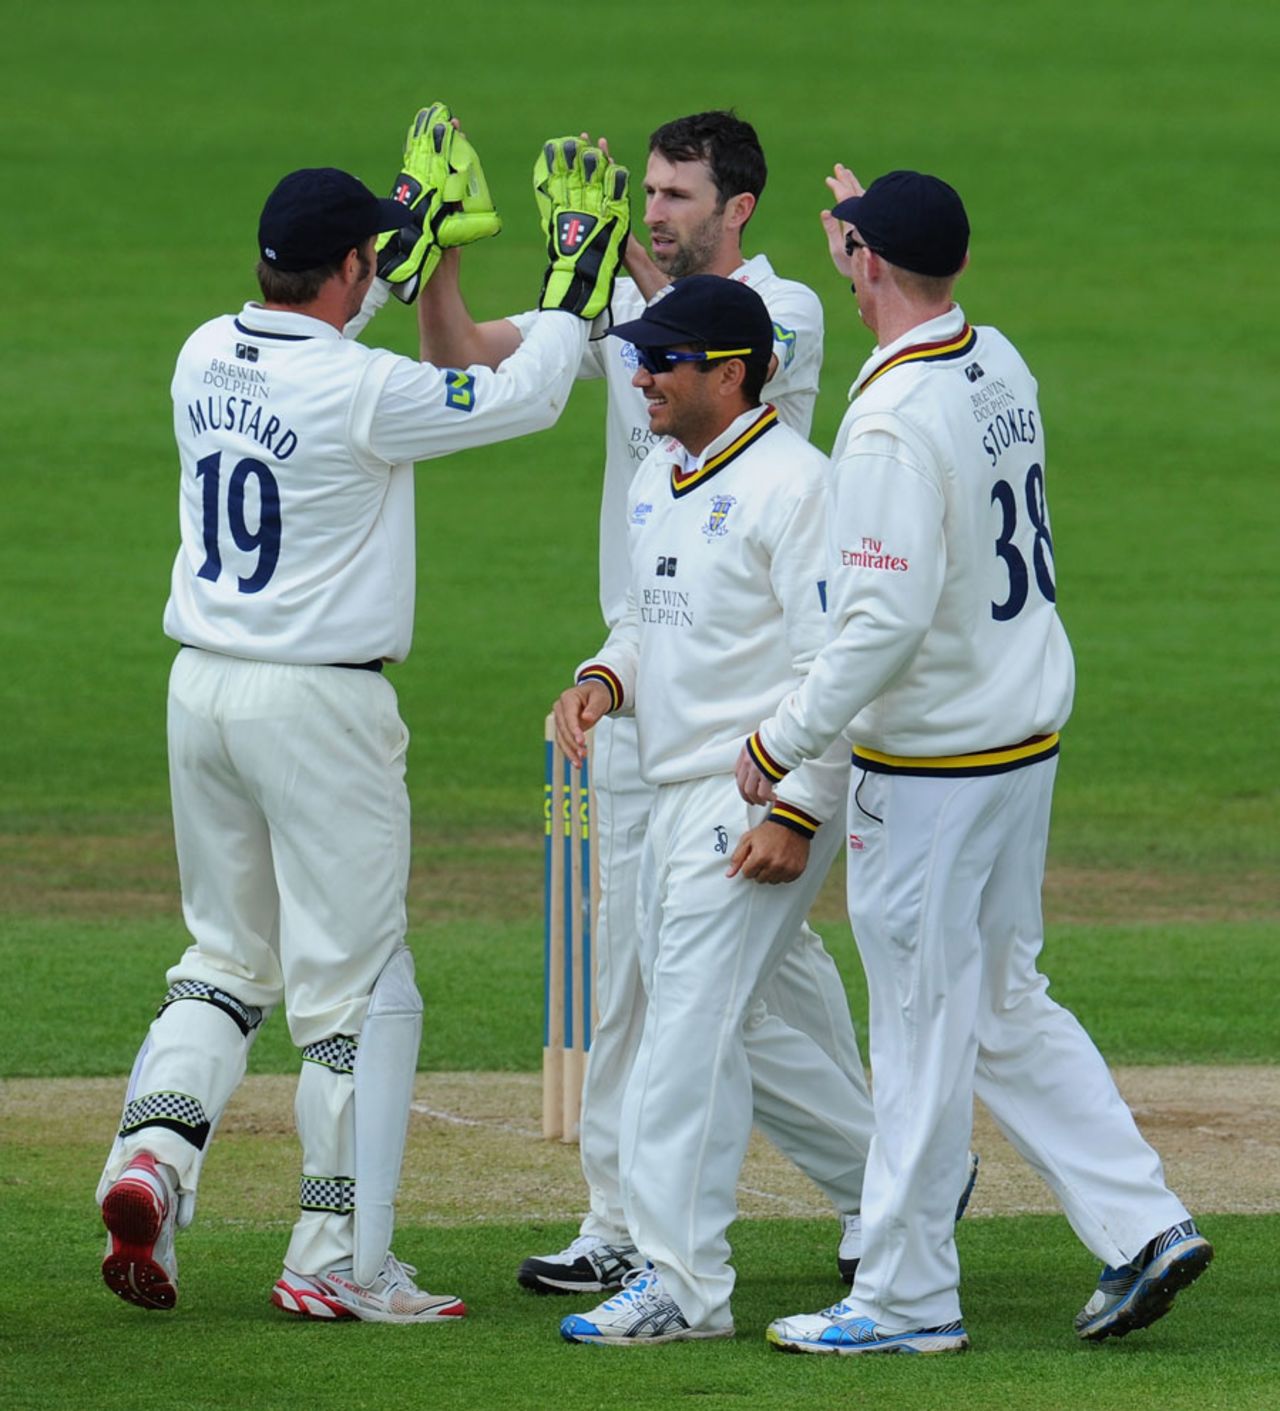 Graham Onions claimed another five-wicket haul, Durham v Middlesex, County Championship, Division One, Chester-le-Street, 2nd day, May 23, 2013